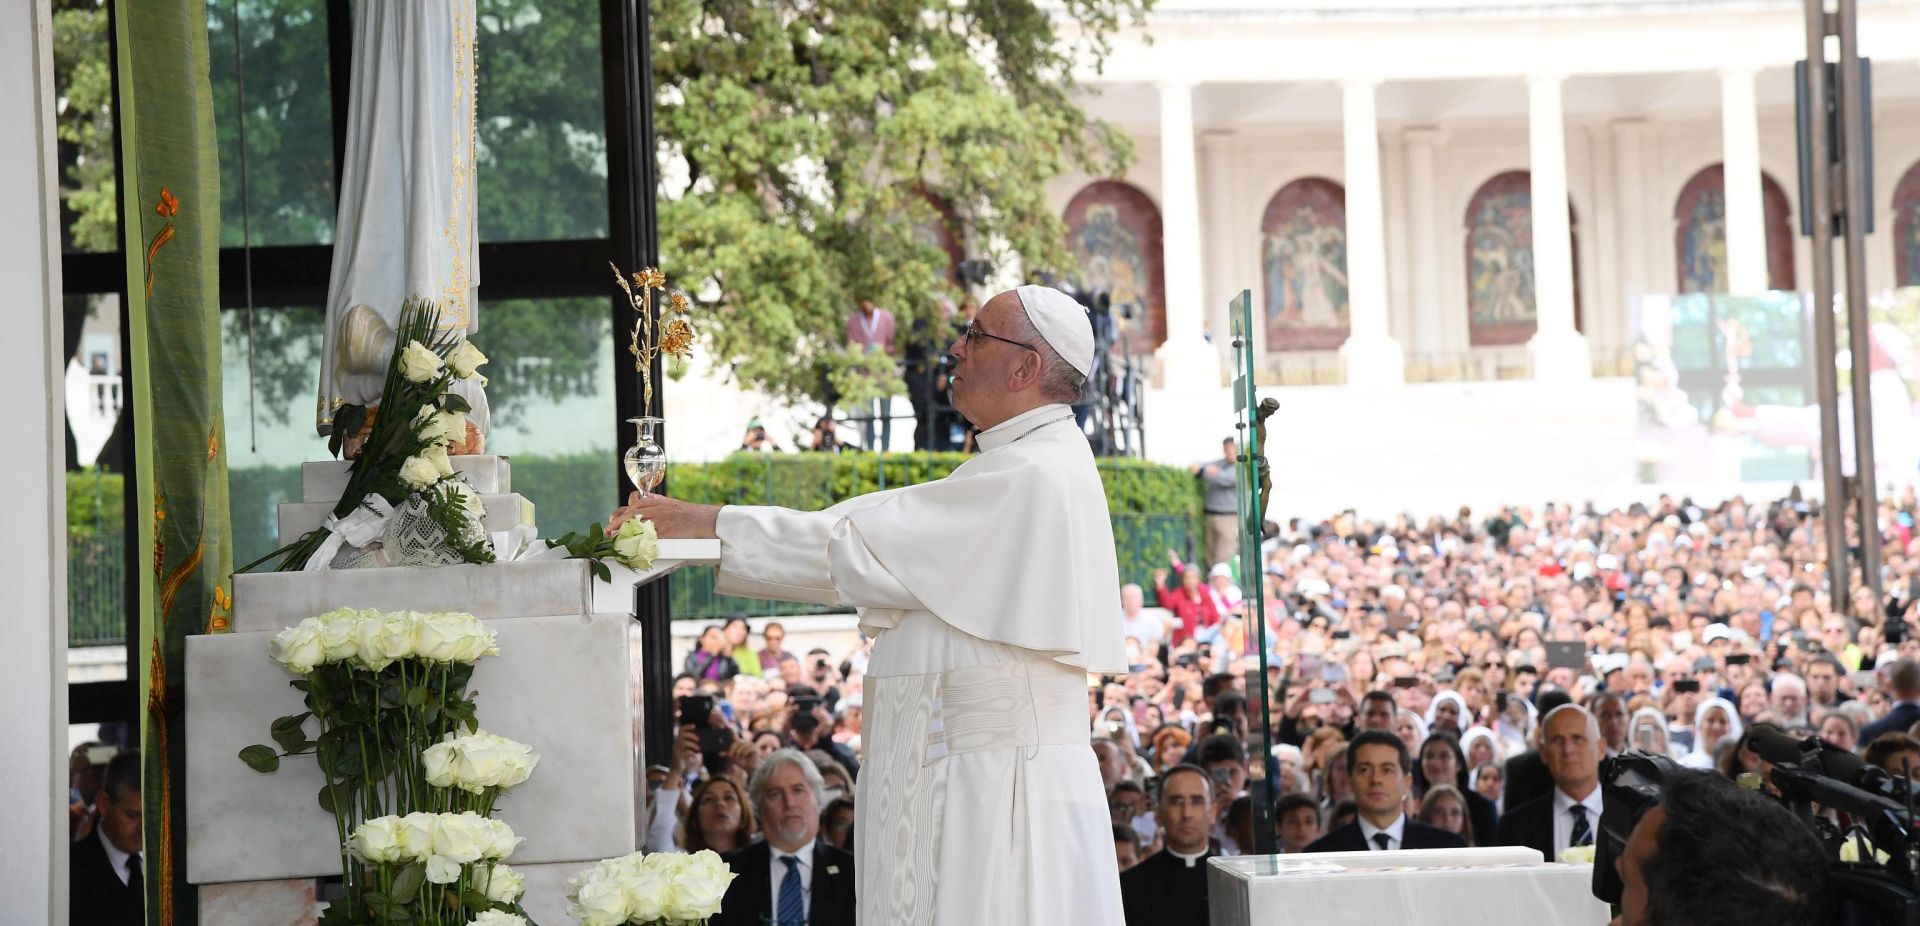 epa05960196 Pope Francis offers the third Golden Rose 'A distinction that Popes attribute to personalities or Sanctuaries, churches or cities, in recognition and reward for marked services rendered to the Church or for the good of society', to Fatima's Sanctuary, Leiria, Portugal, 12 May 2017. Pope Francis is in visiting Fatima on 12 and 13 May on the 100th anniversary of the appearances of Mary.  EPA/MAURIZIO BRAMBATTI